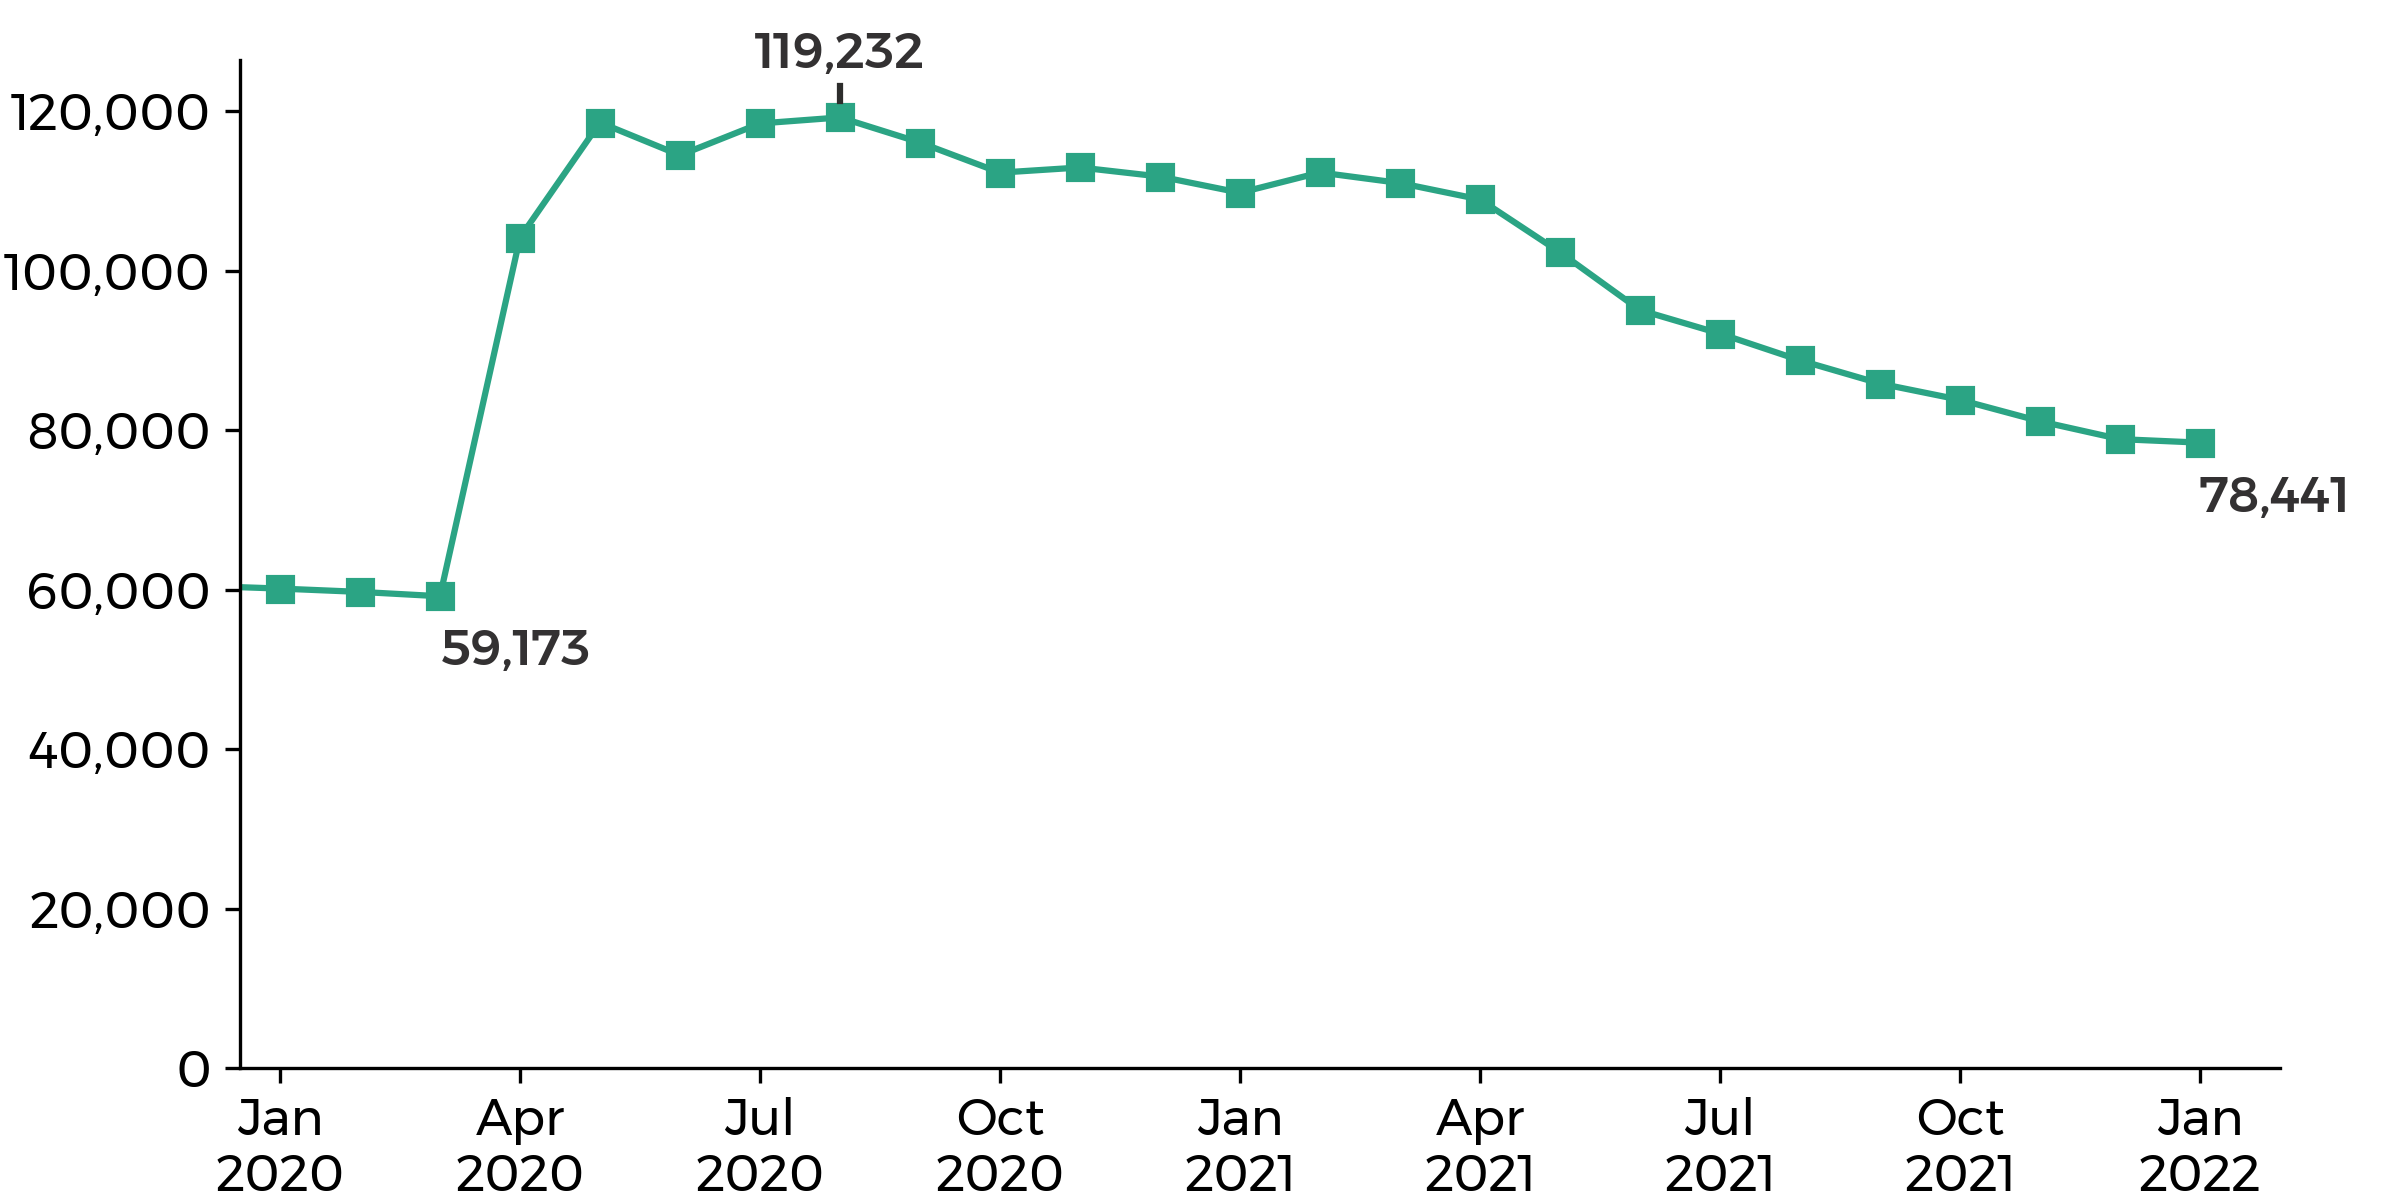 graph showing the Wales claimant count went up from 59,173 in March 2020 to 119,232 in August 2020, then decreasing to 78,441 in January 2022.